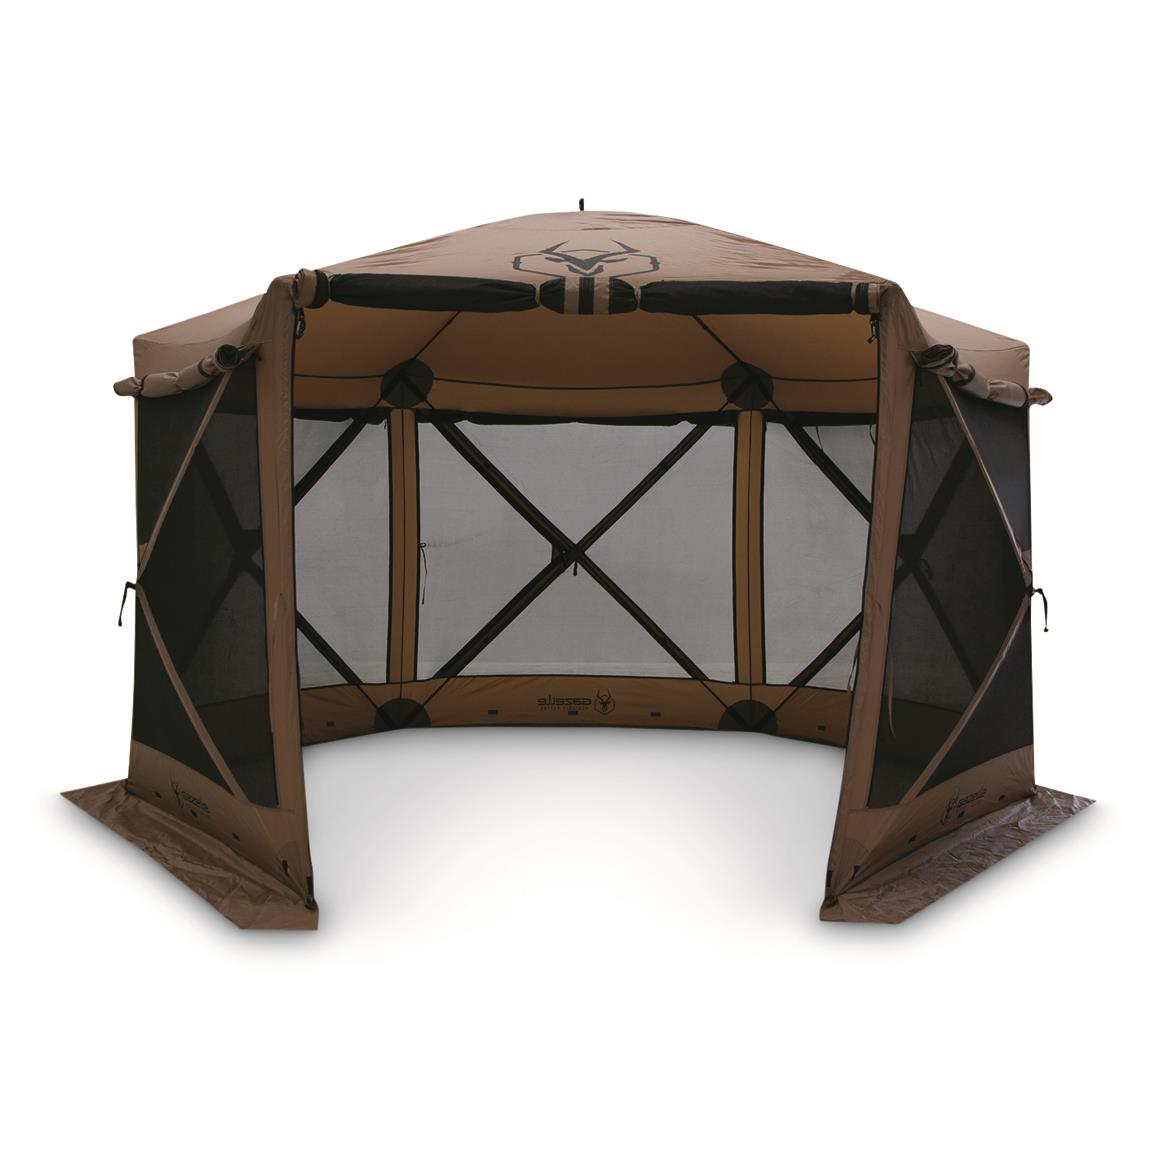 Gazelle G6 Deluxe 6-Sided Portable Screen Tent, Brown